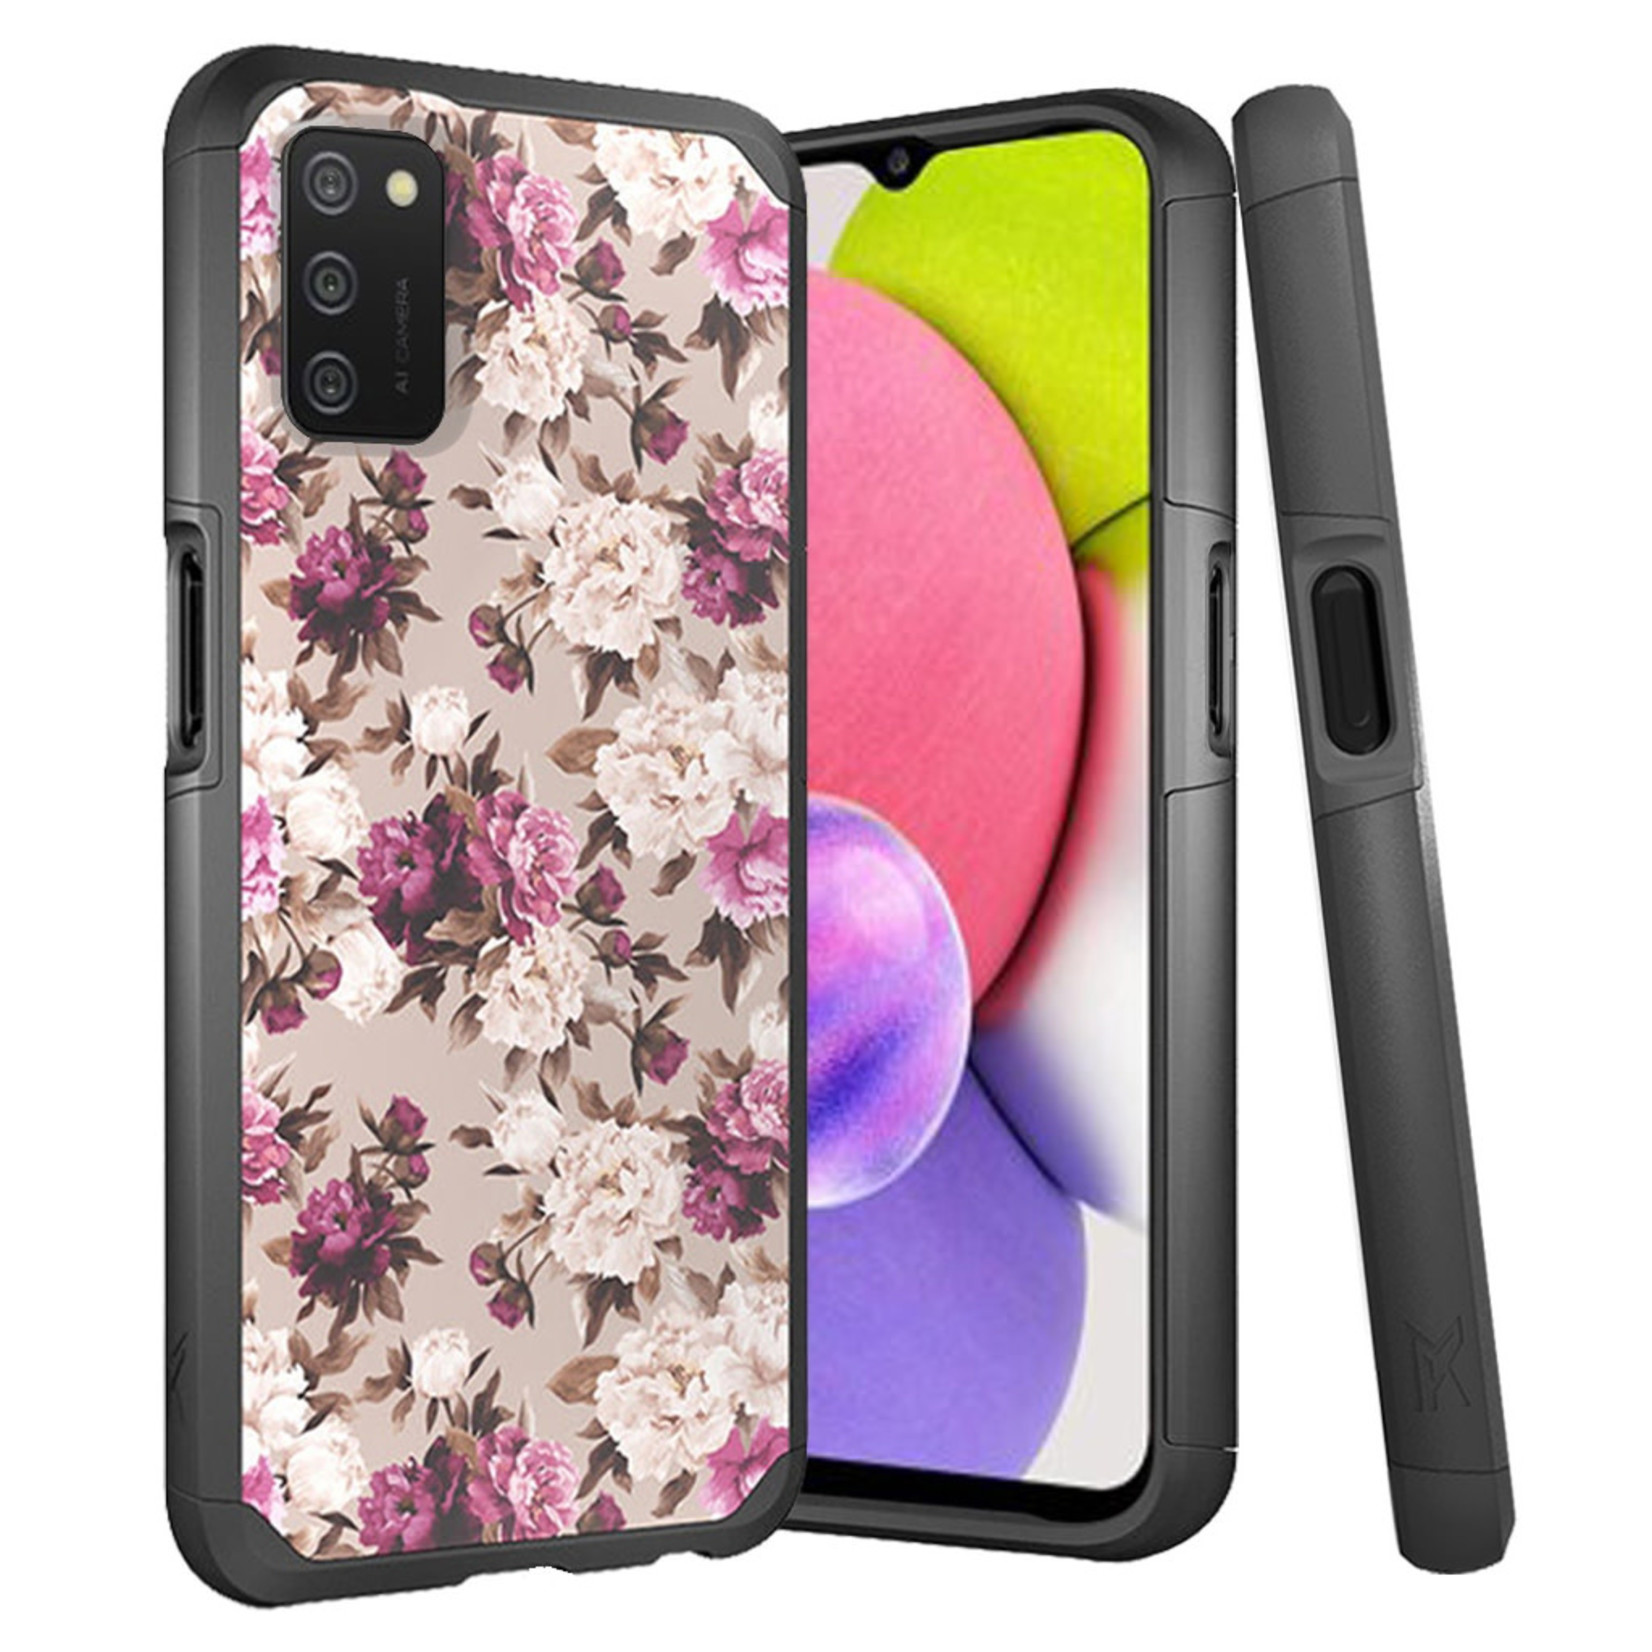 METKASE | Armor ShockProof Dual Layer Hybrid Floral Case Cover for Samsung A03s